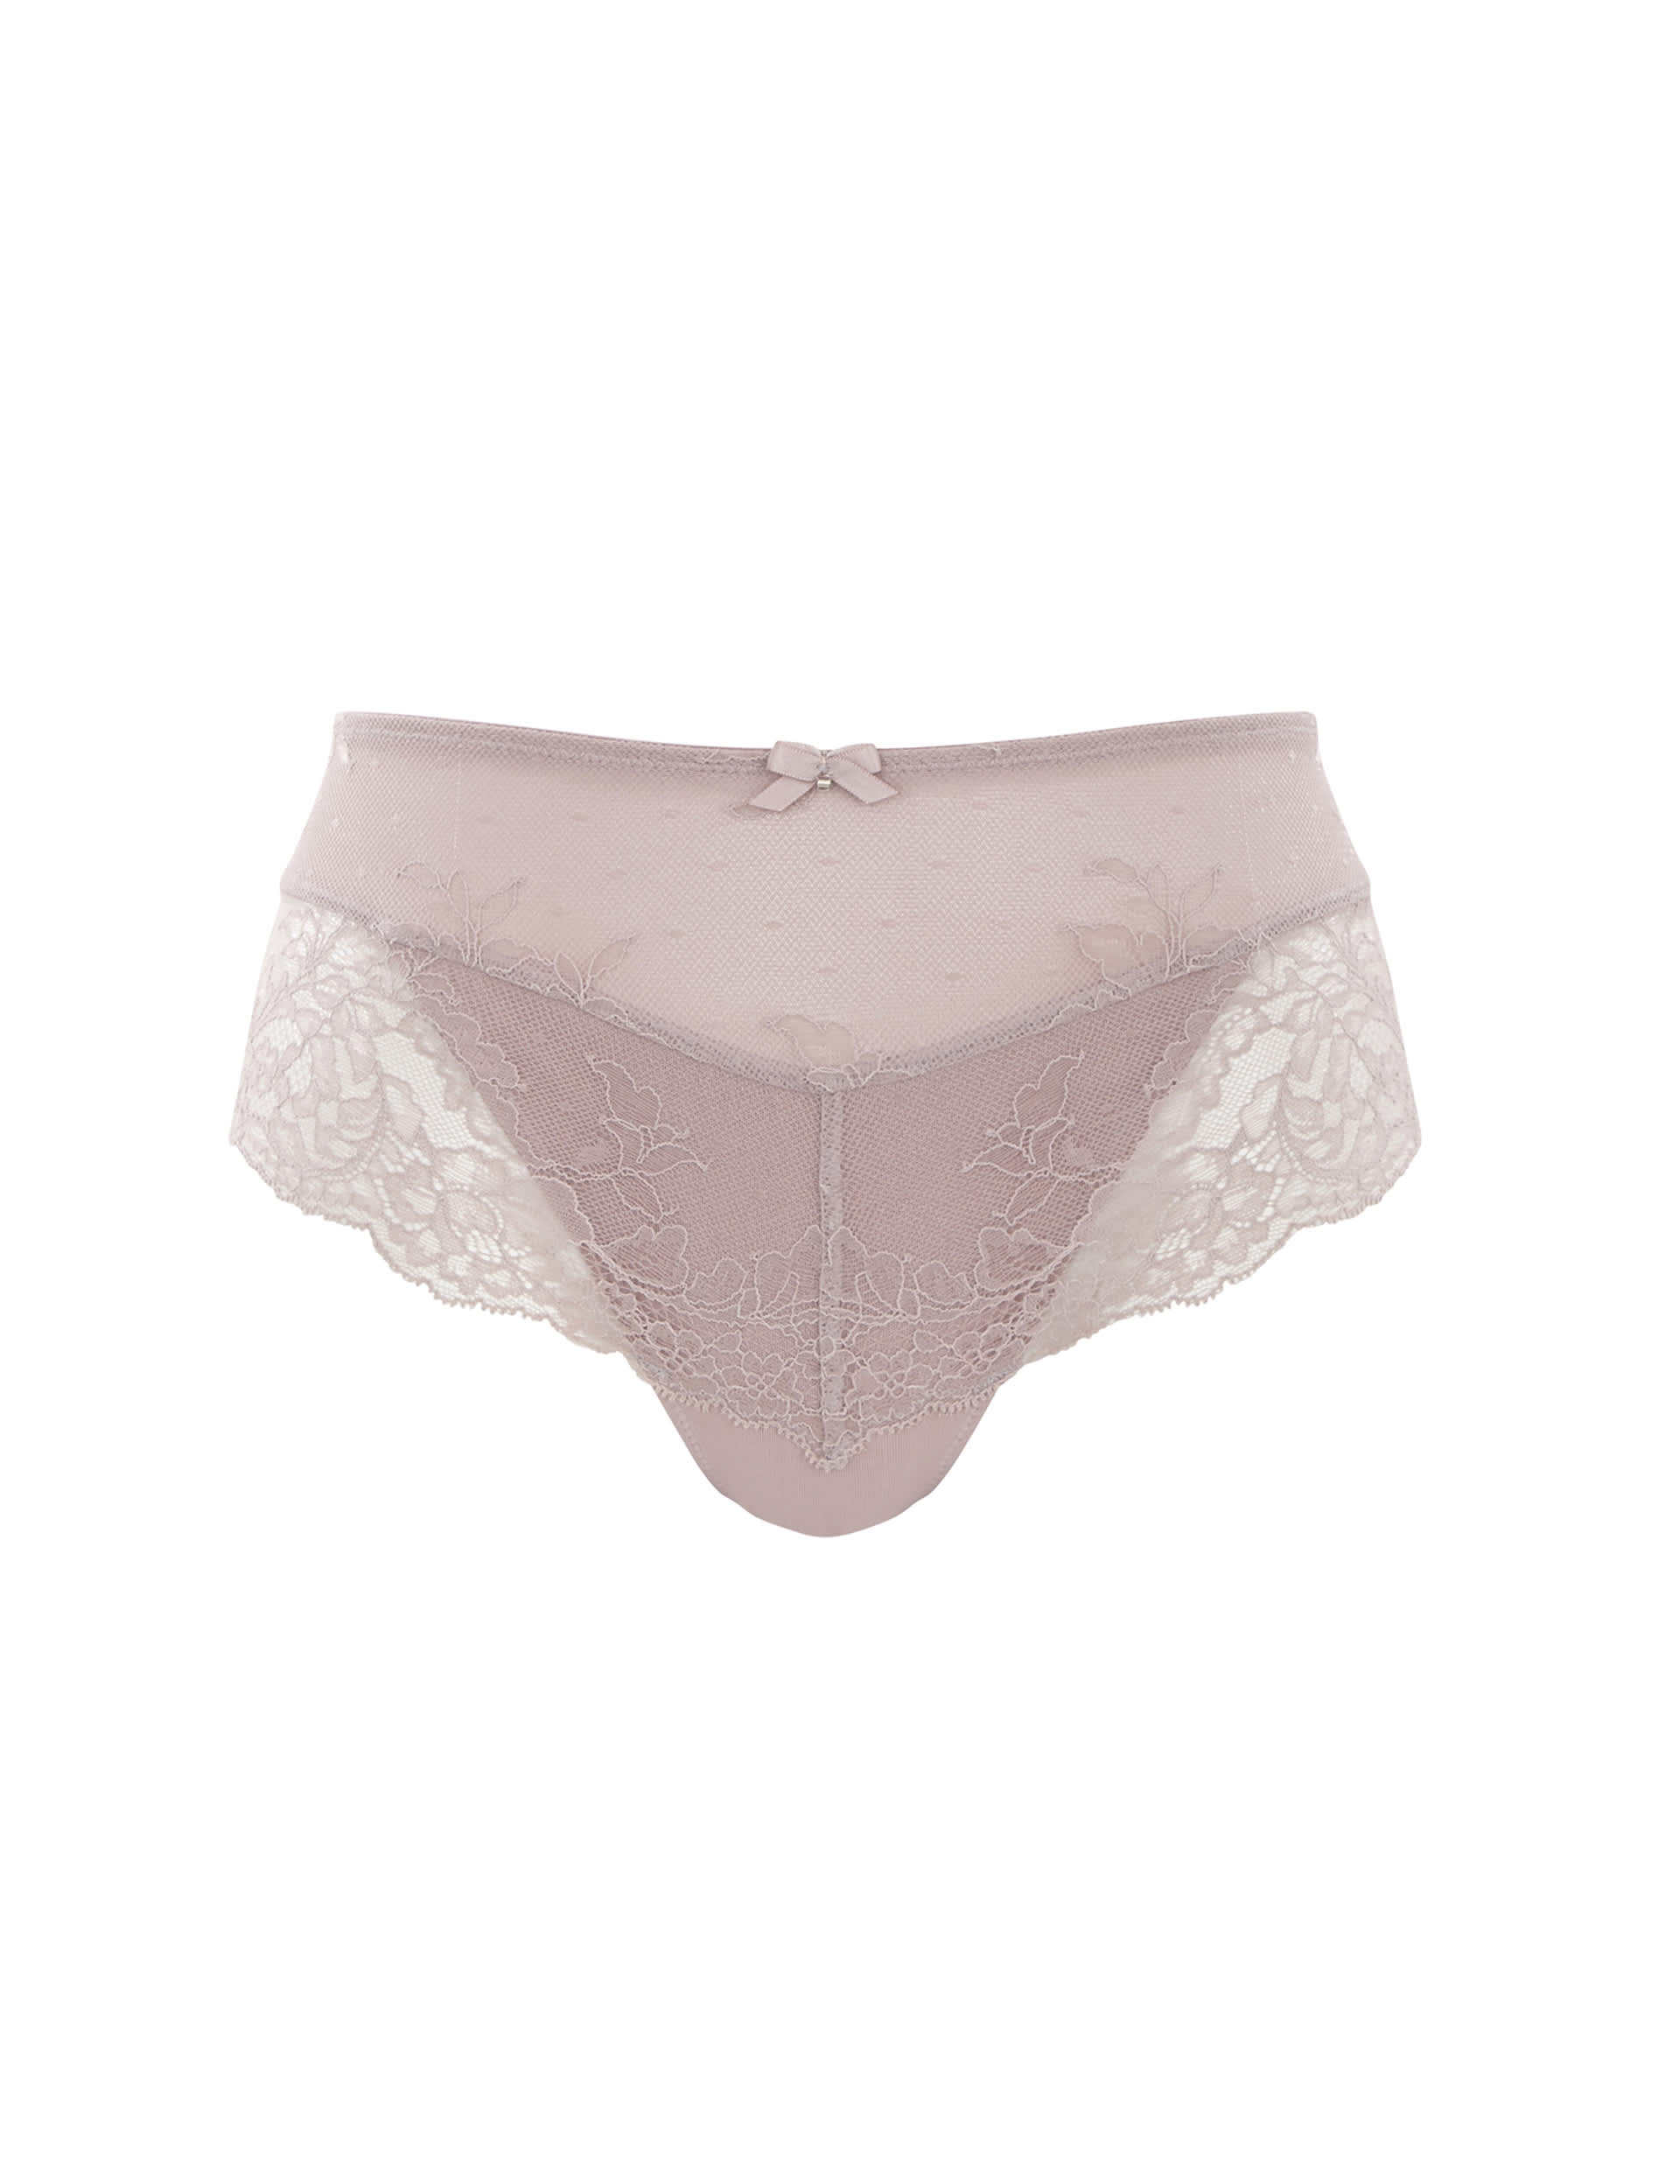 Ana Lace Low Rise Briefs